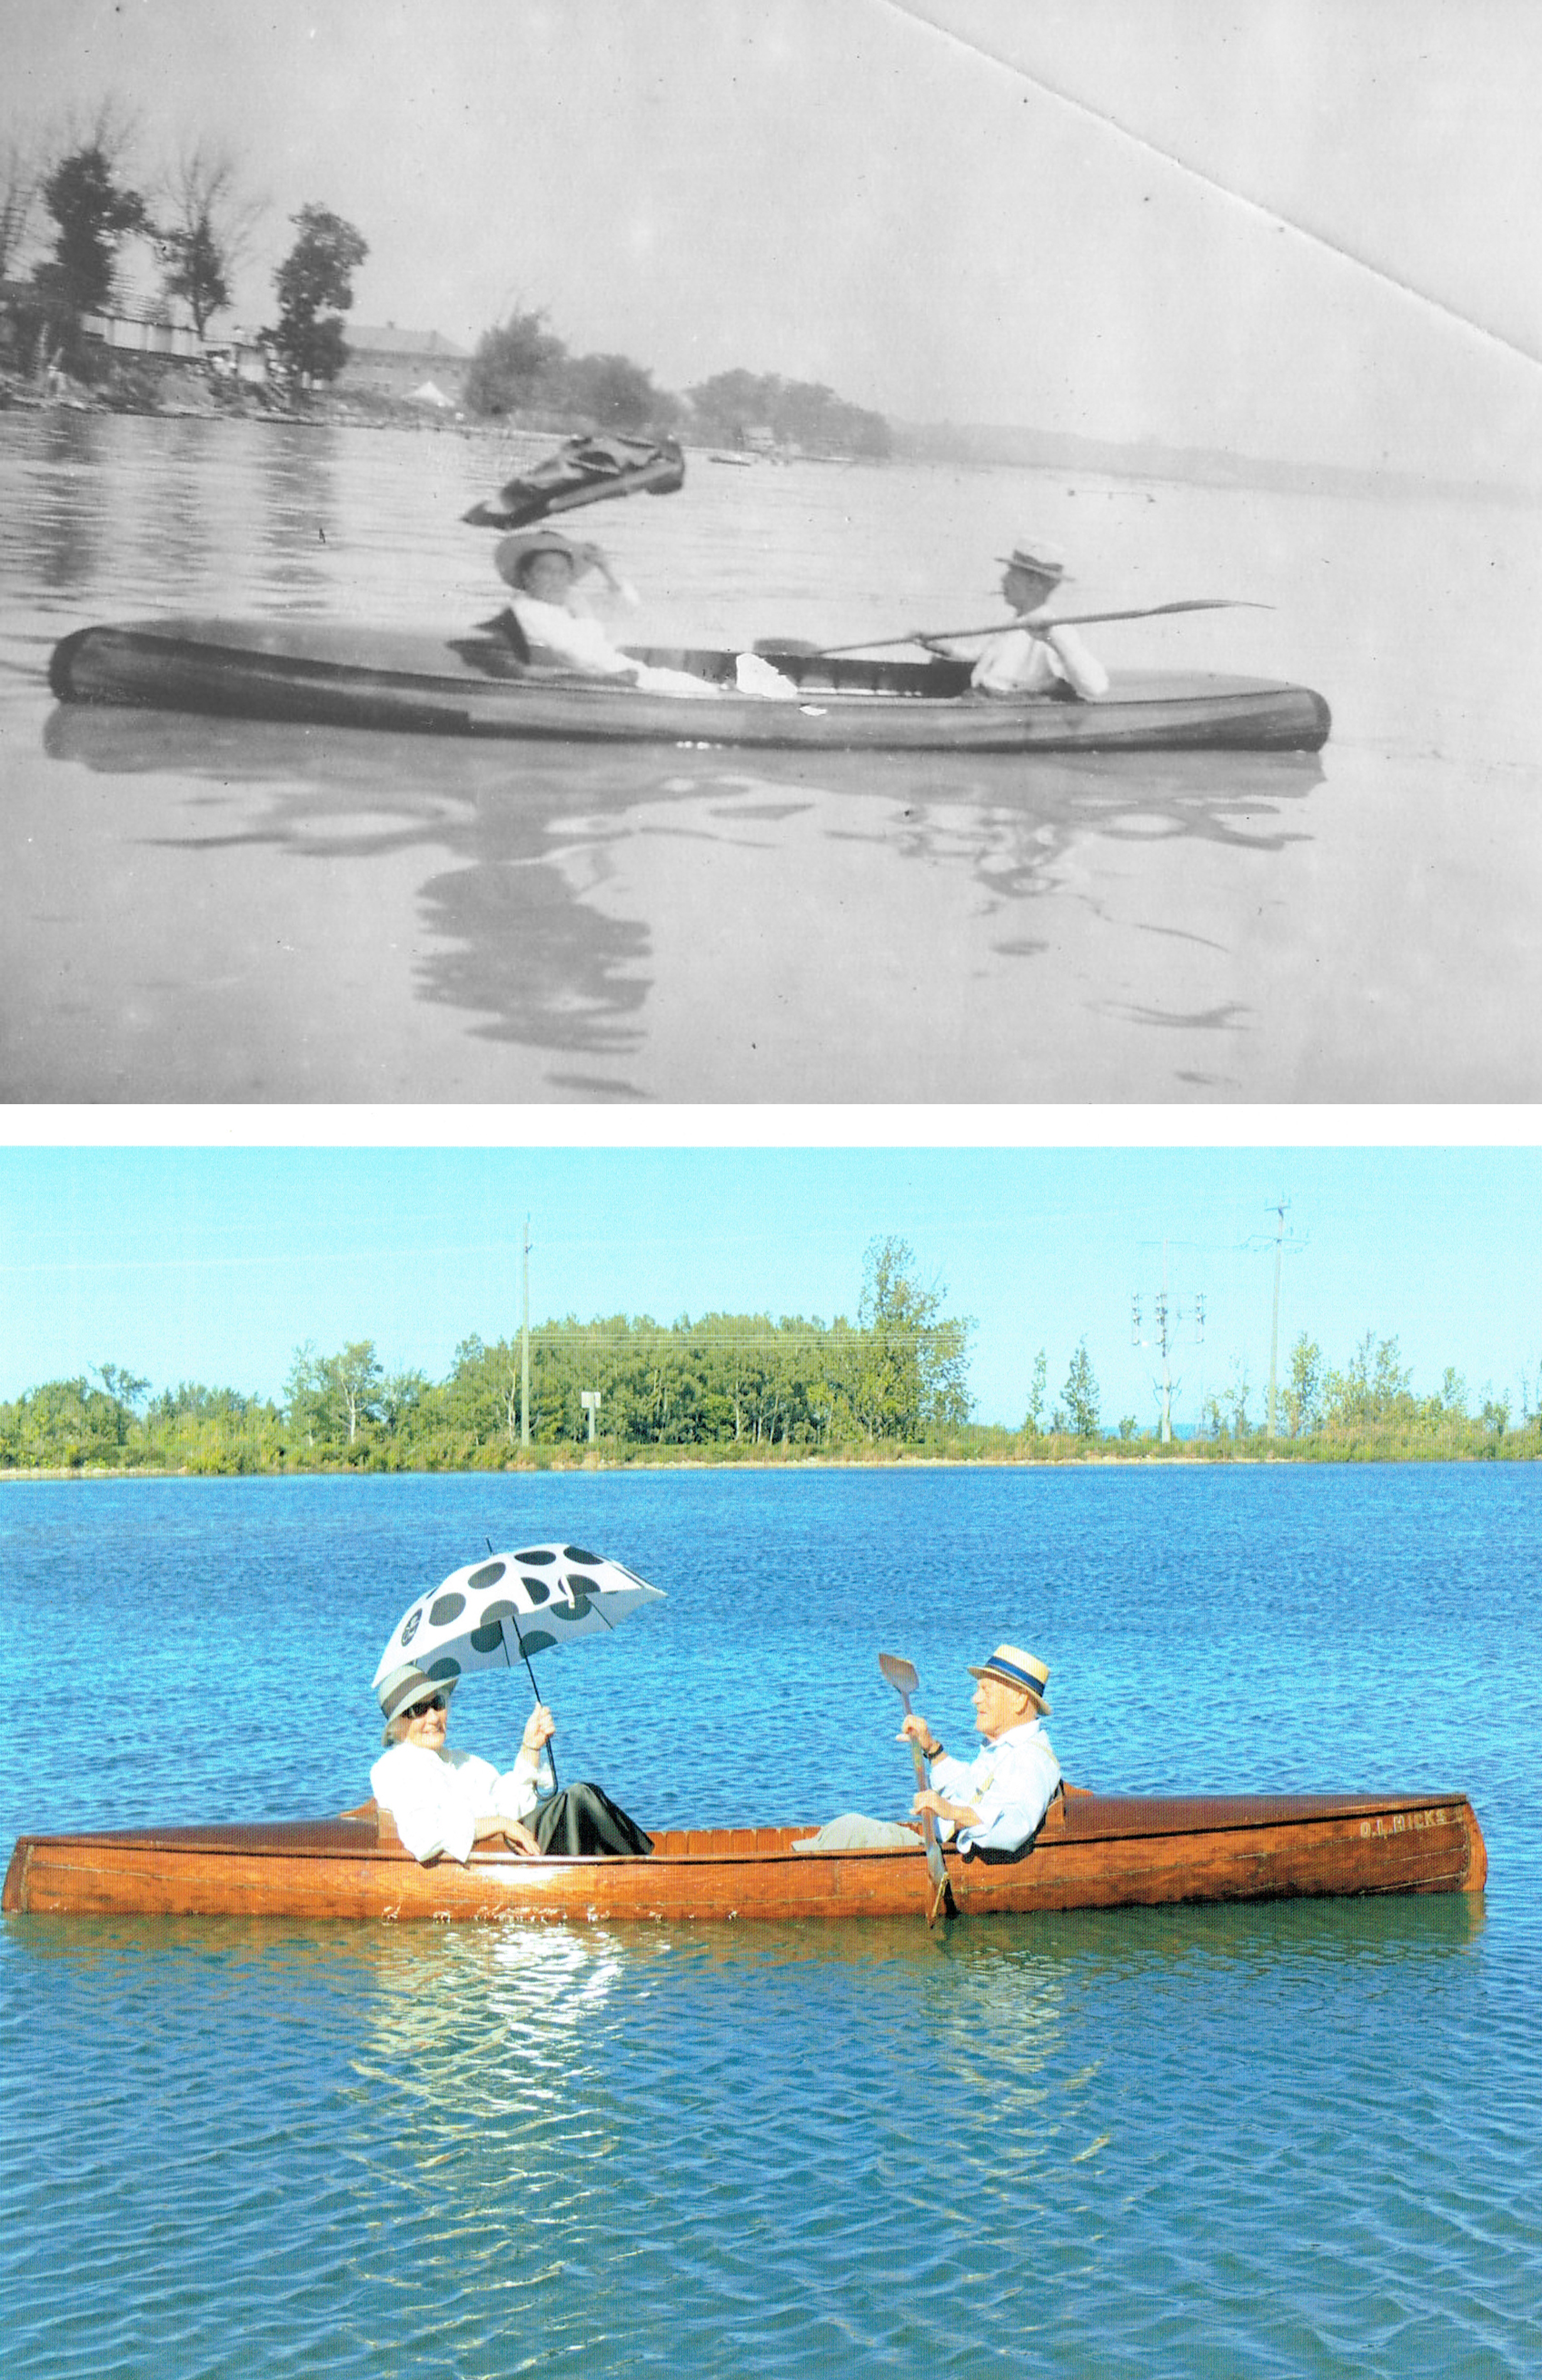 Two views of old Hicks canoes.